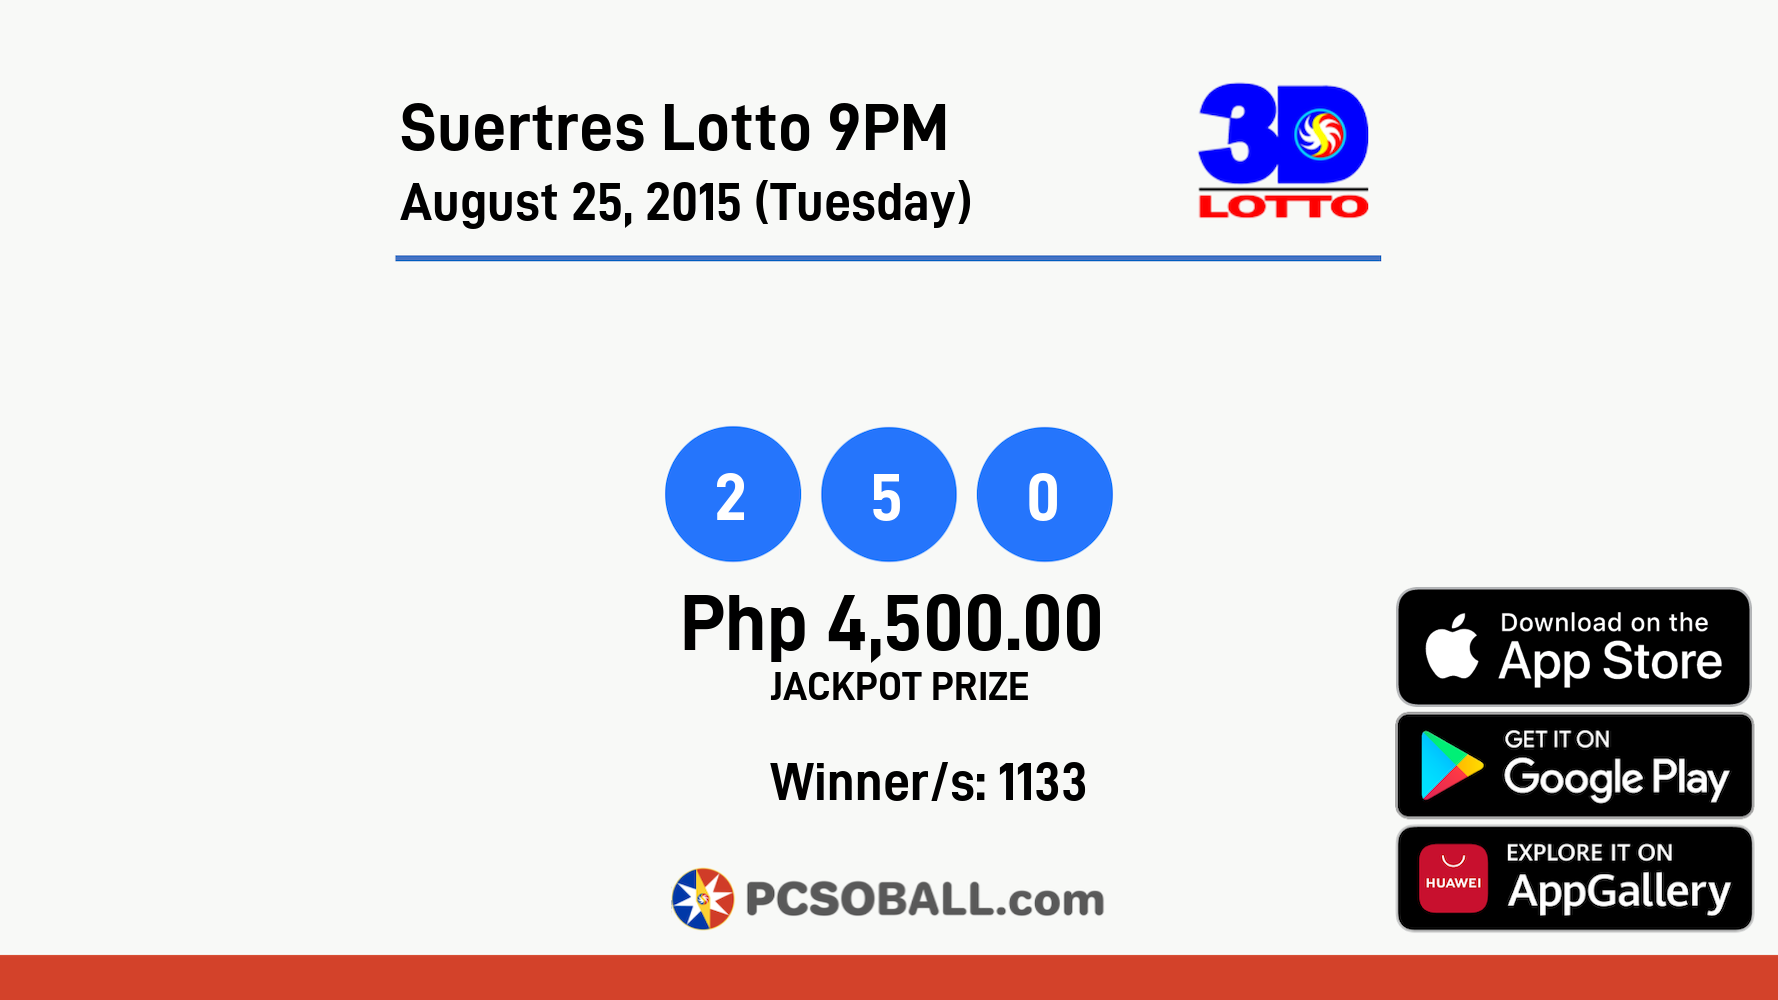 Suertres Lotto 9PM August 25, 2015 (Tuesday) Result